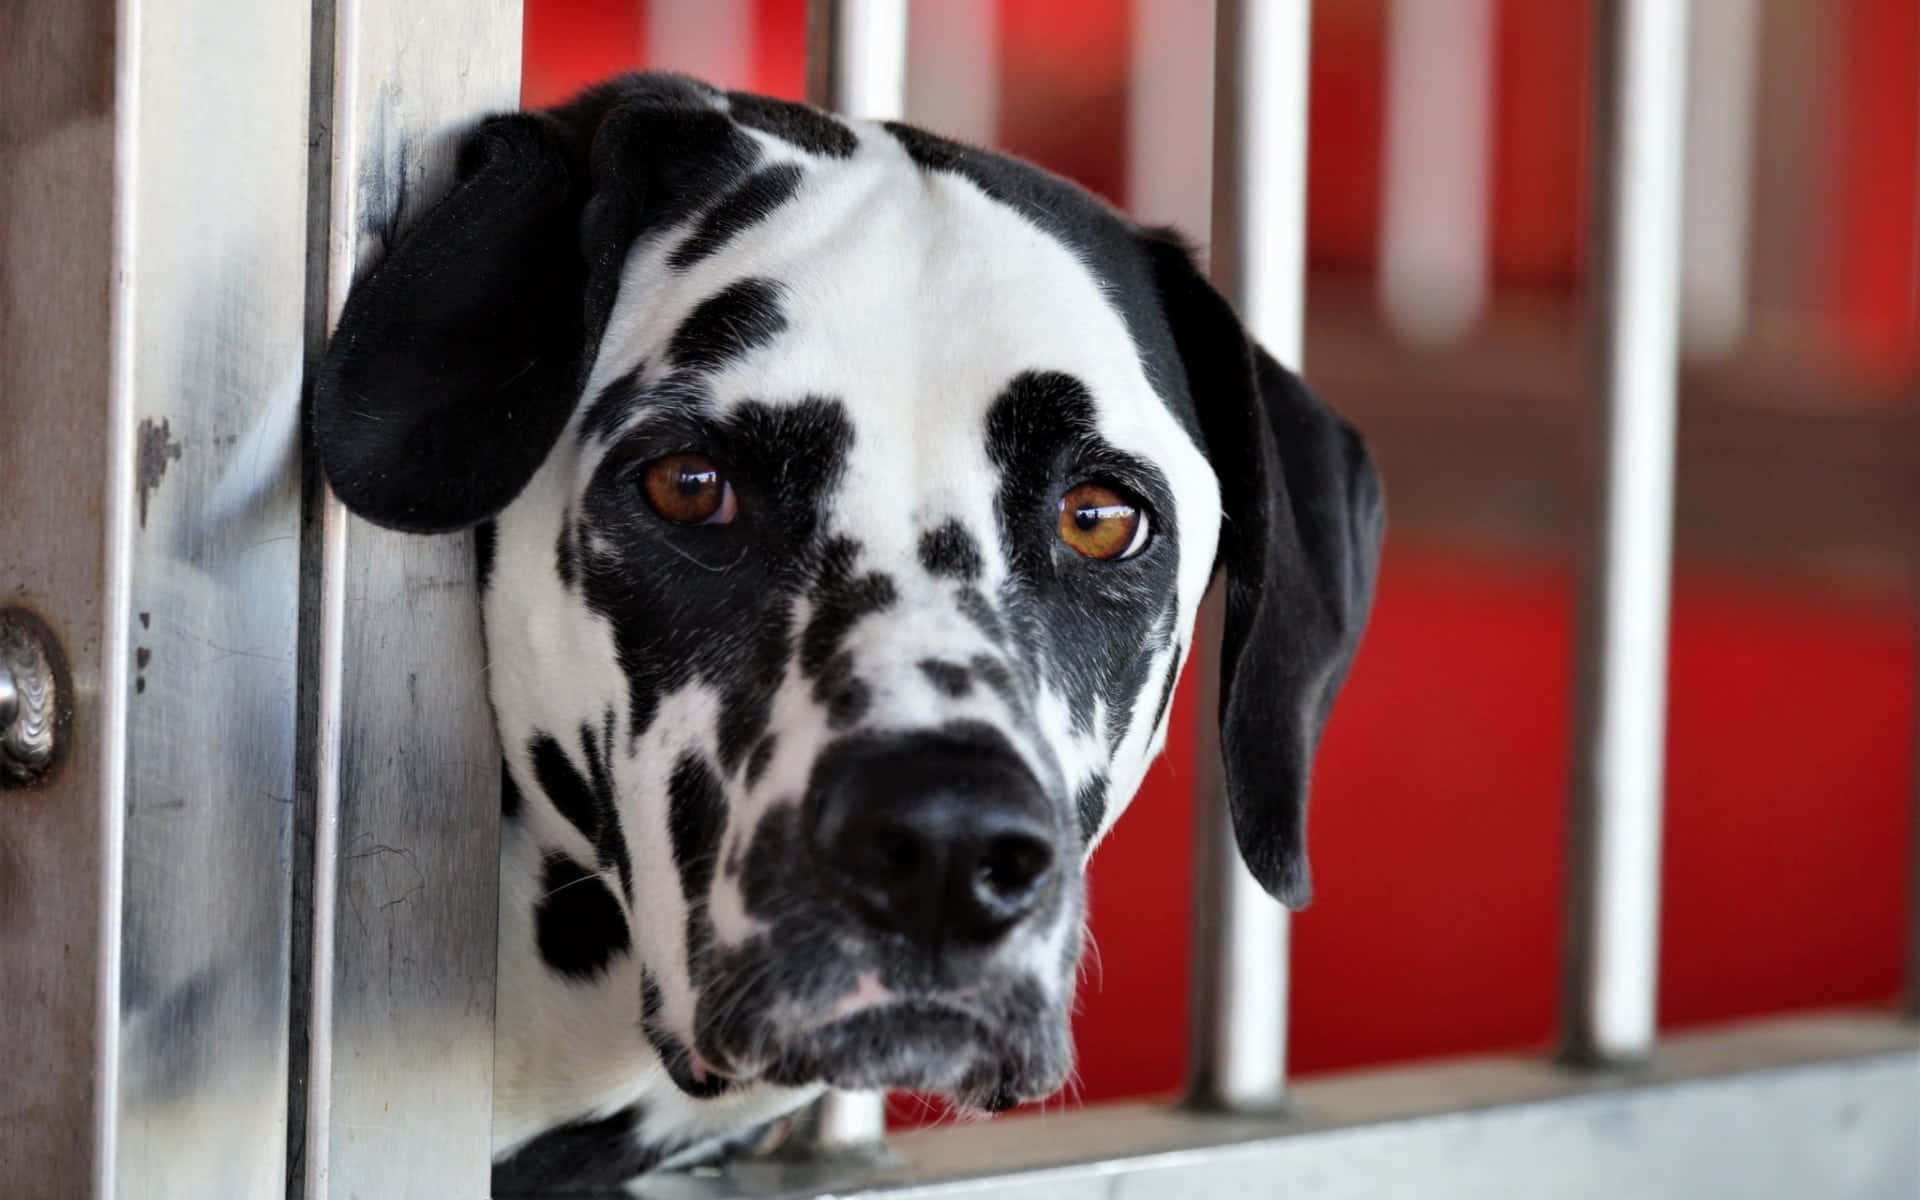 A beautiful white and black spotted Dalmatian pup